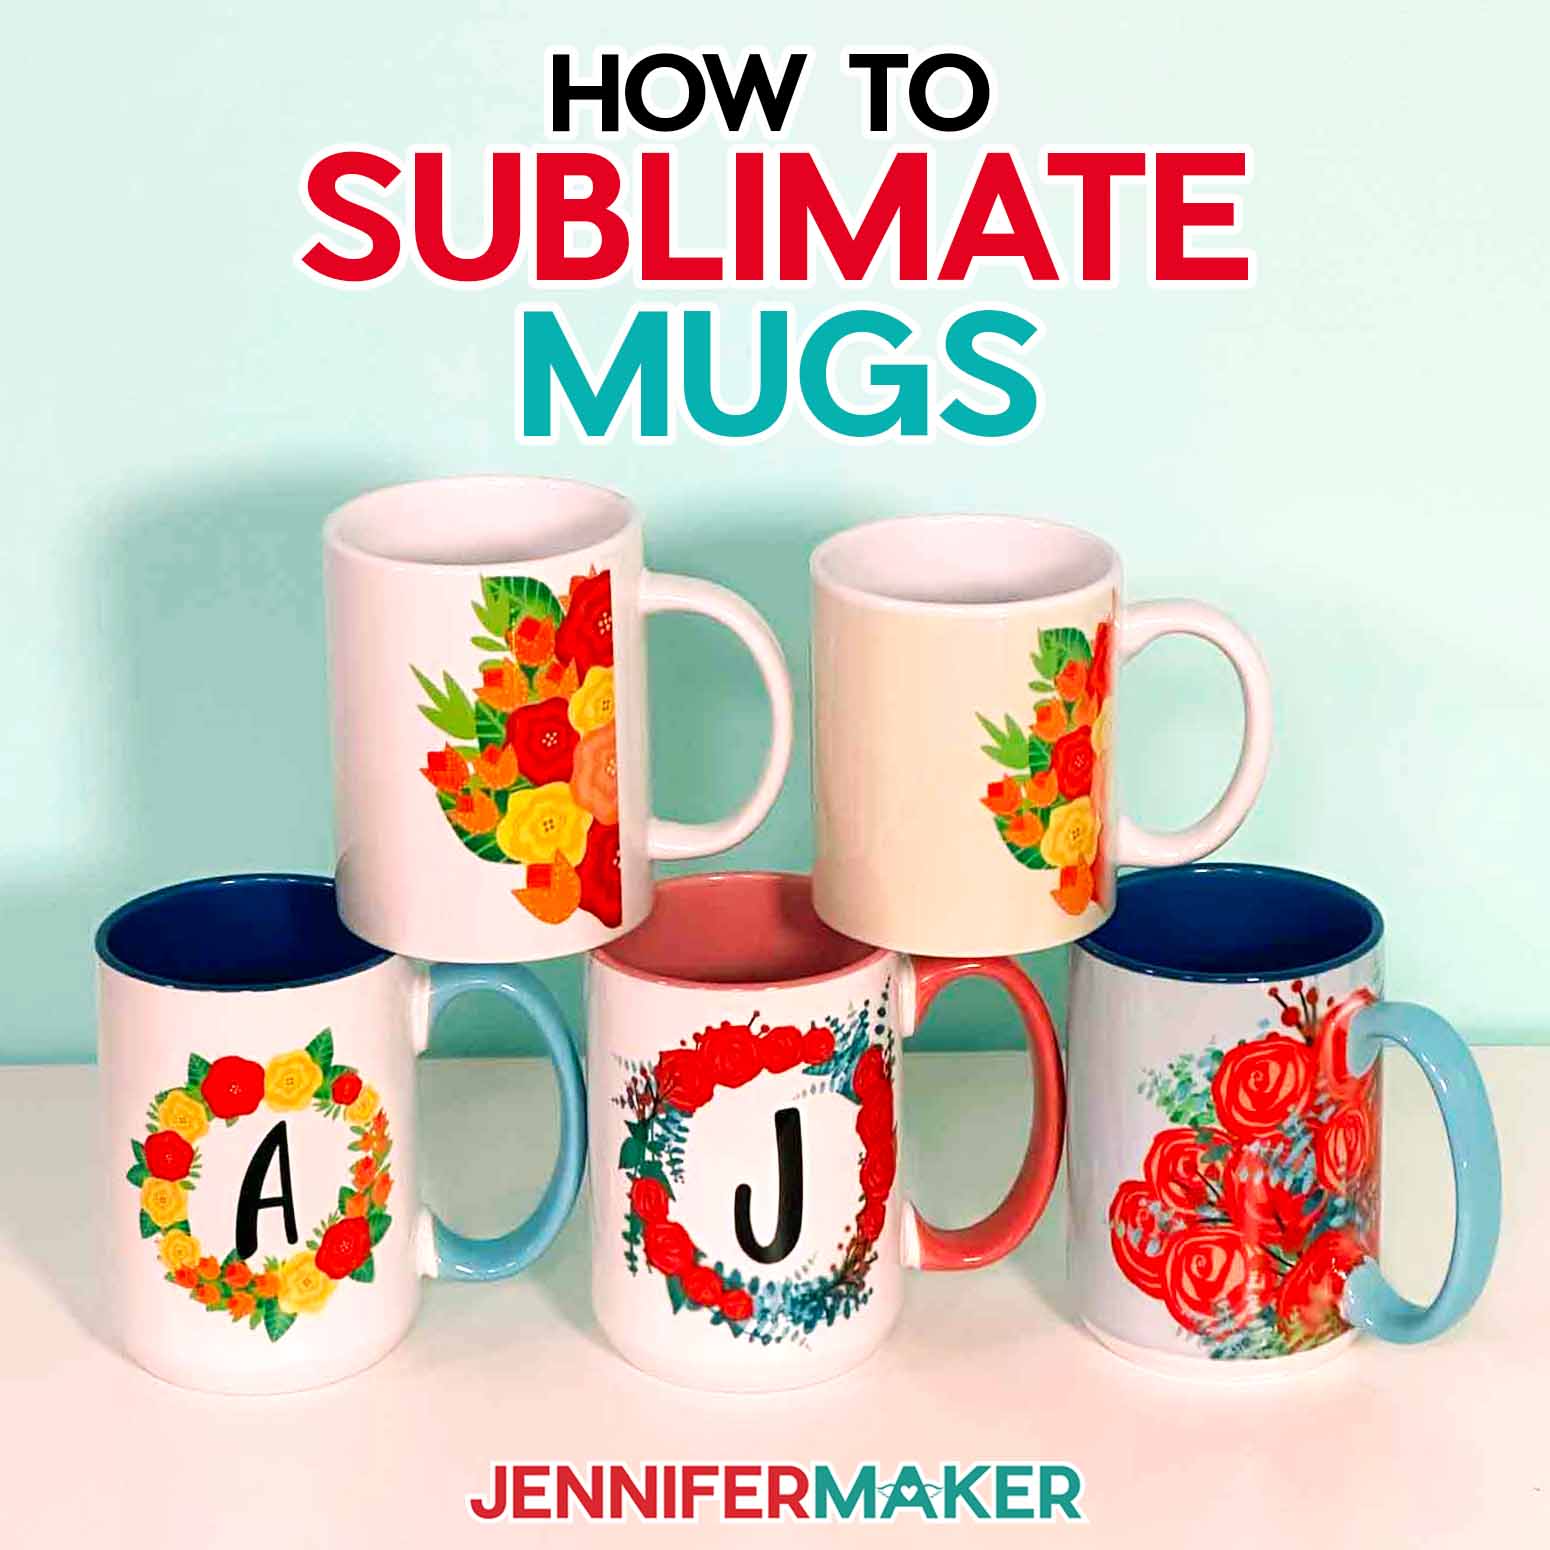 How to sublimate mugs. A stack of sublimated floral mugs! You can learn to sublimate mugs too with JenniferMaker's new tutorial.